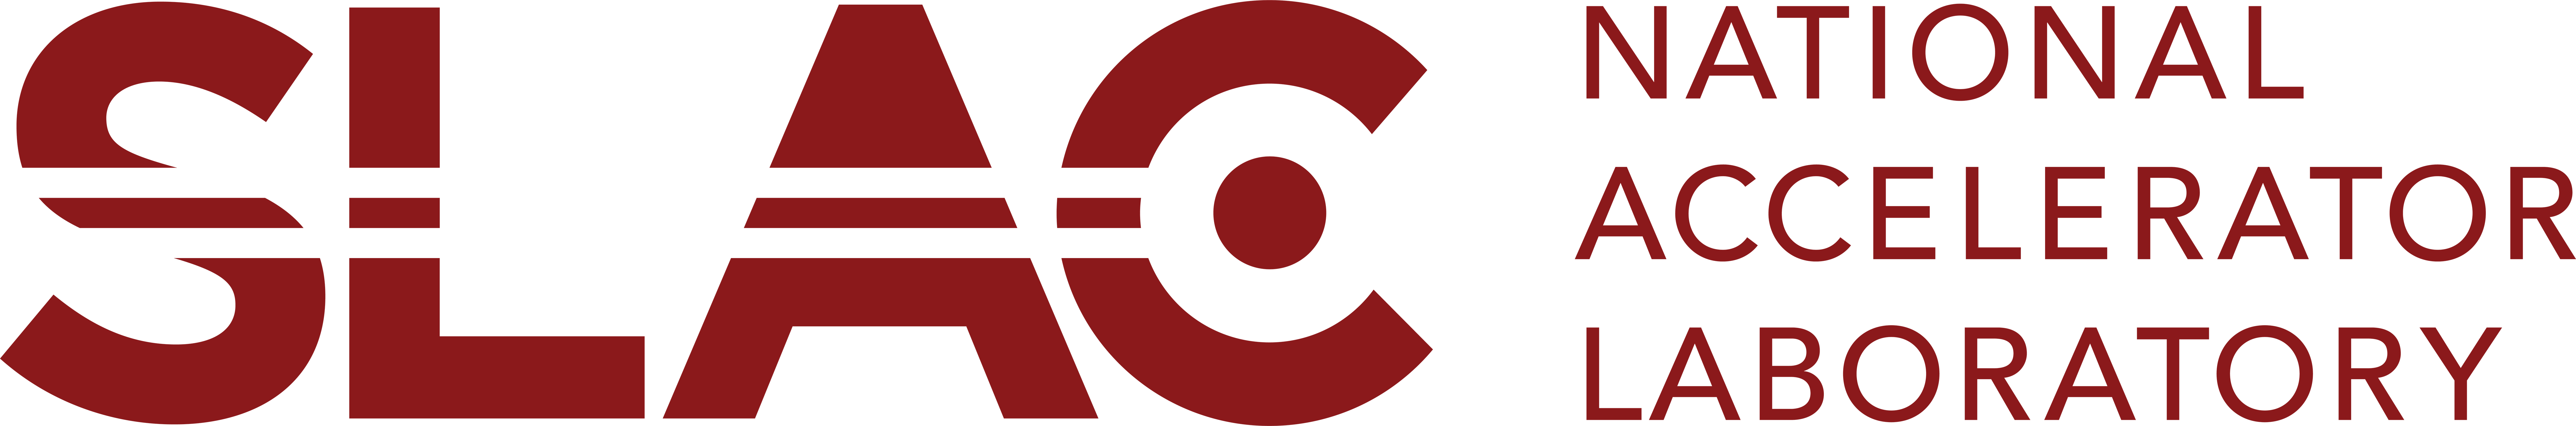 institutions-SLAC_logo_2.png